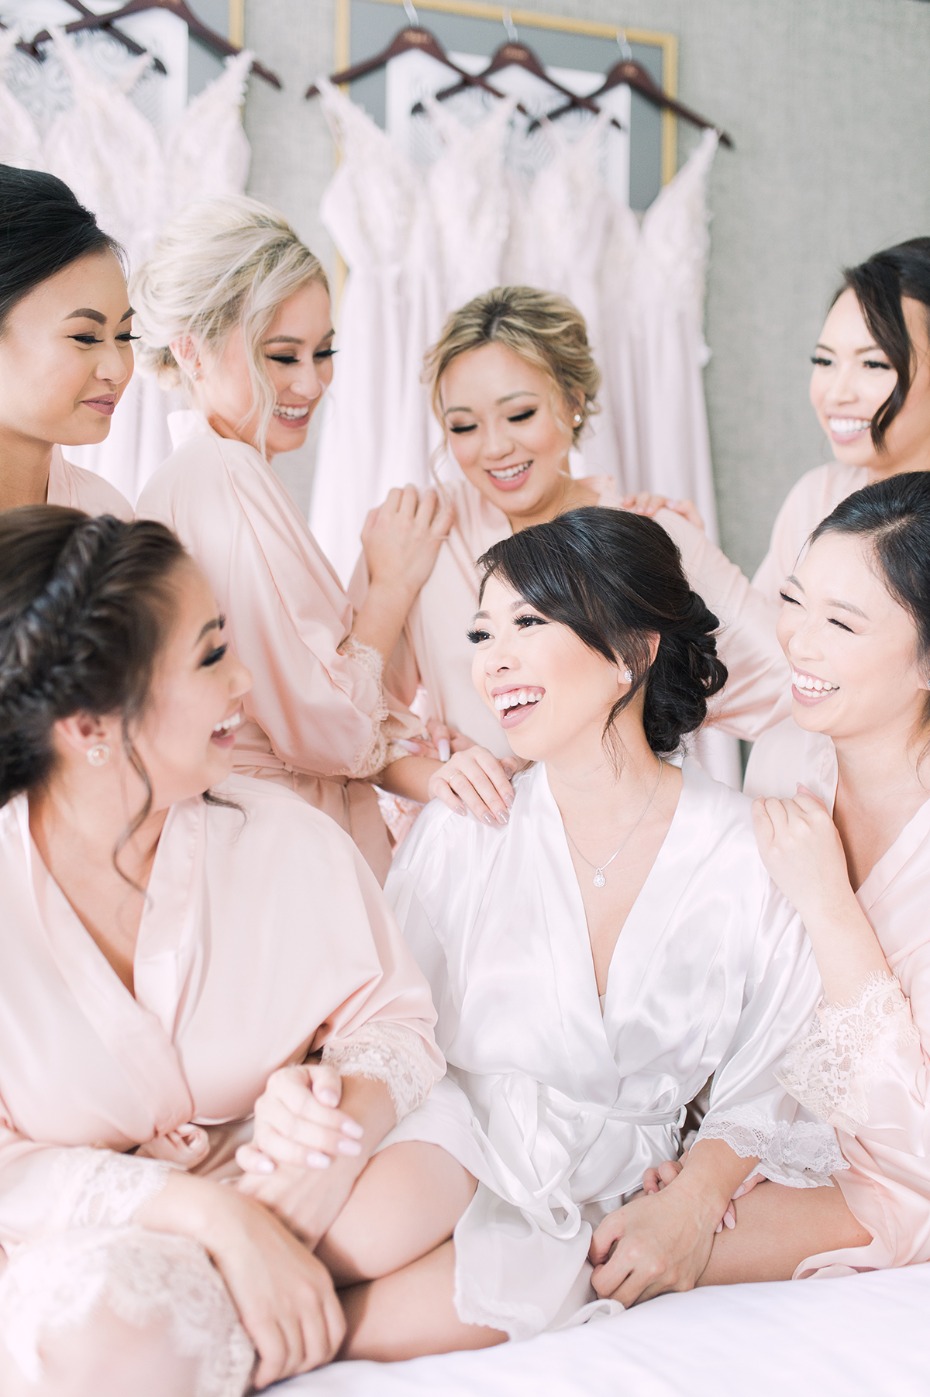 a bride and her bridesmaids getting wedding ready